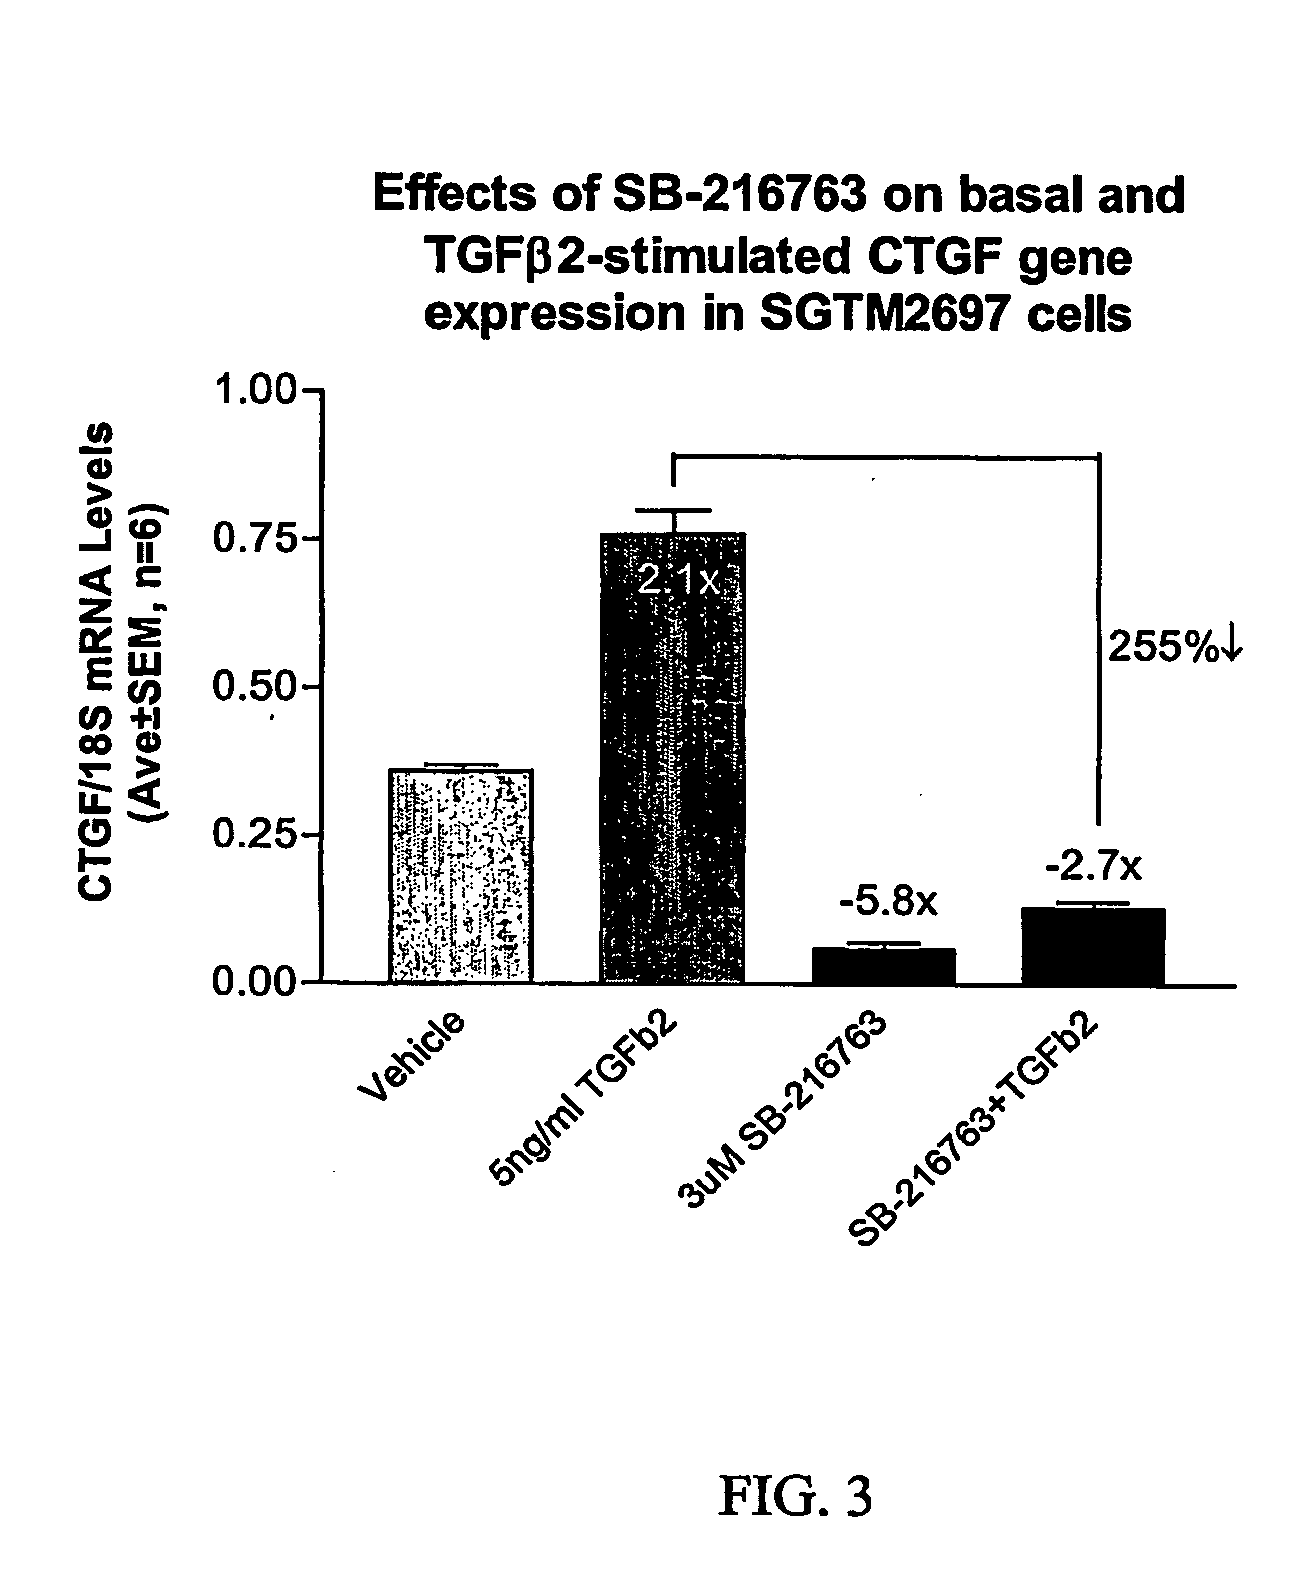 Agents which regulate, inhibit, or modulate the activity and/or expression of connective tissue growth factor (ctgf) as a unique means to both lower intraocular pressure and treat glaucomatous retinopathies/optic neuropathies